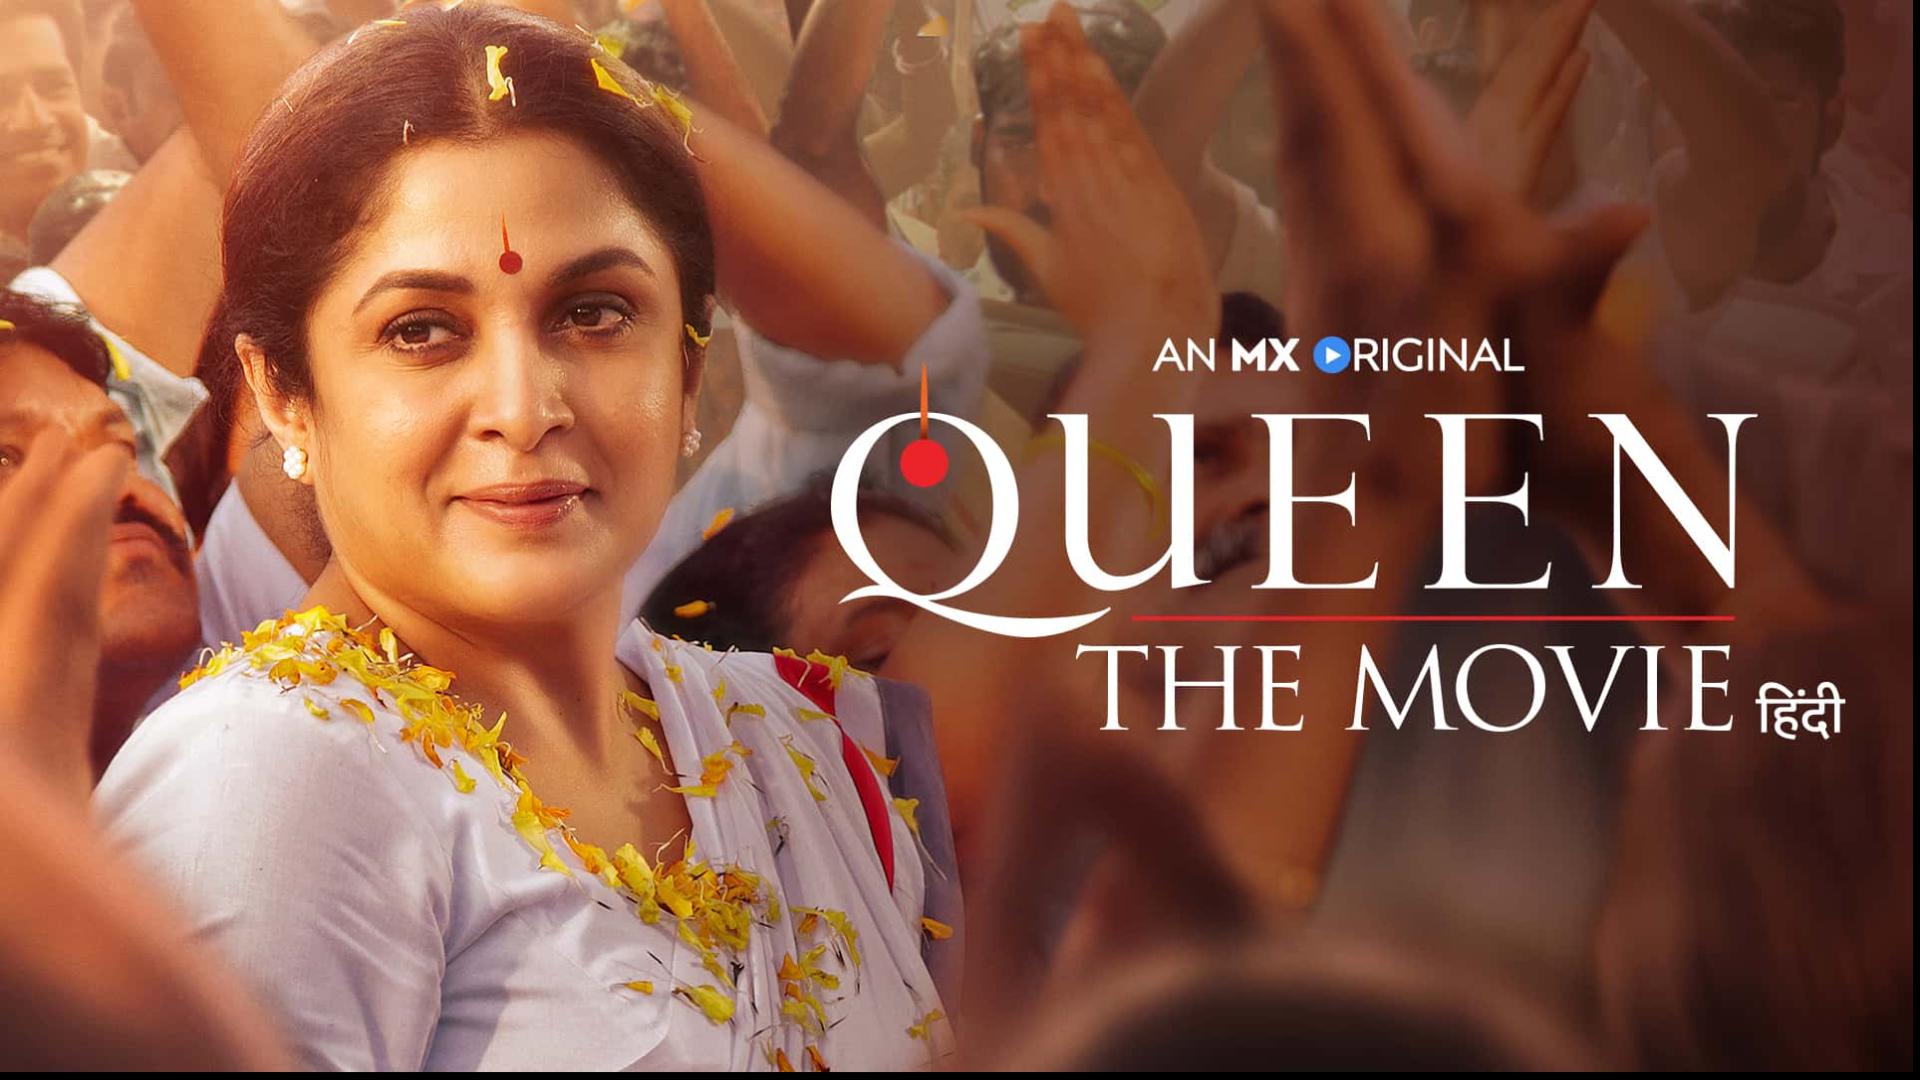 alice rouhana recommends queen hindi movie watch online pic